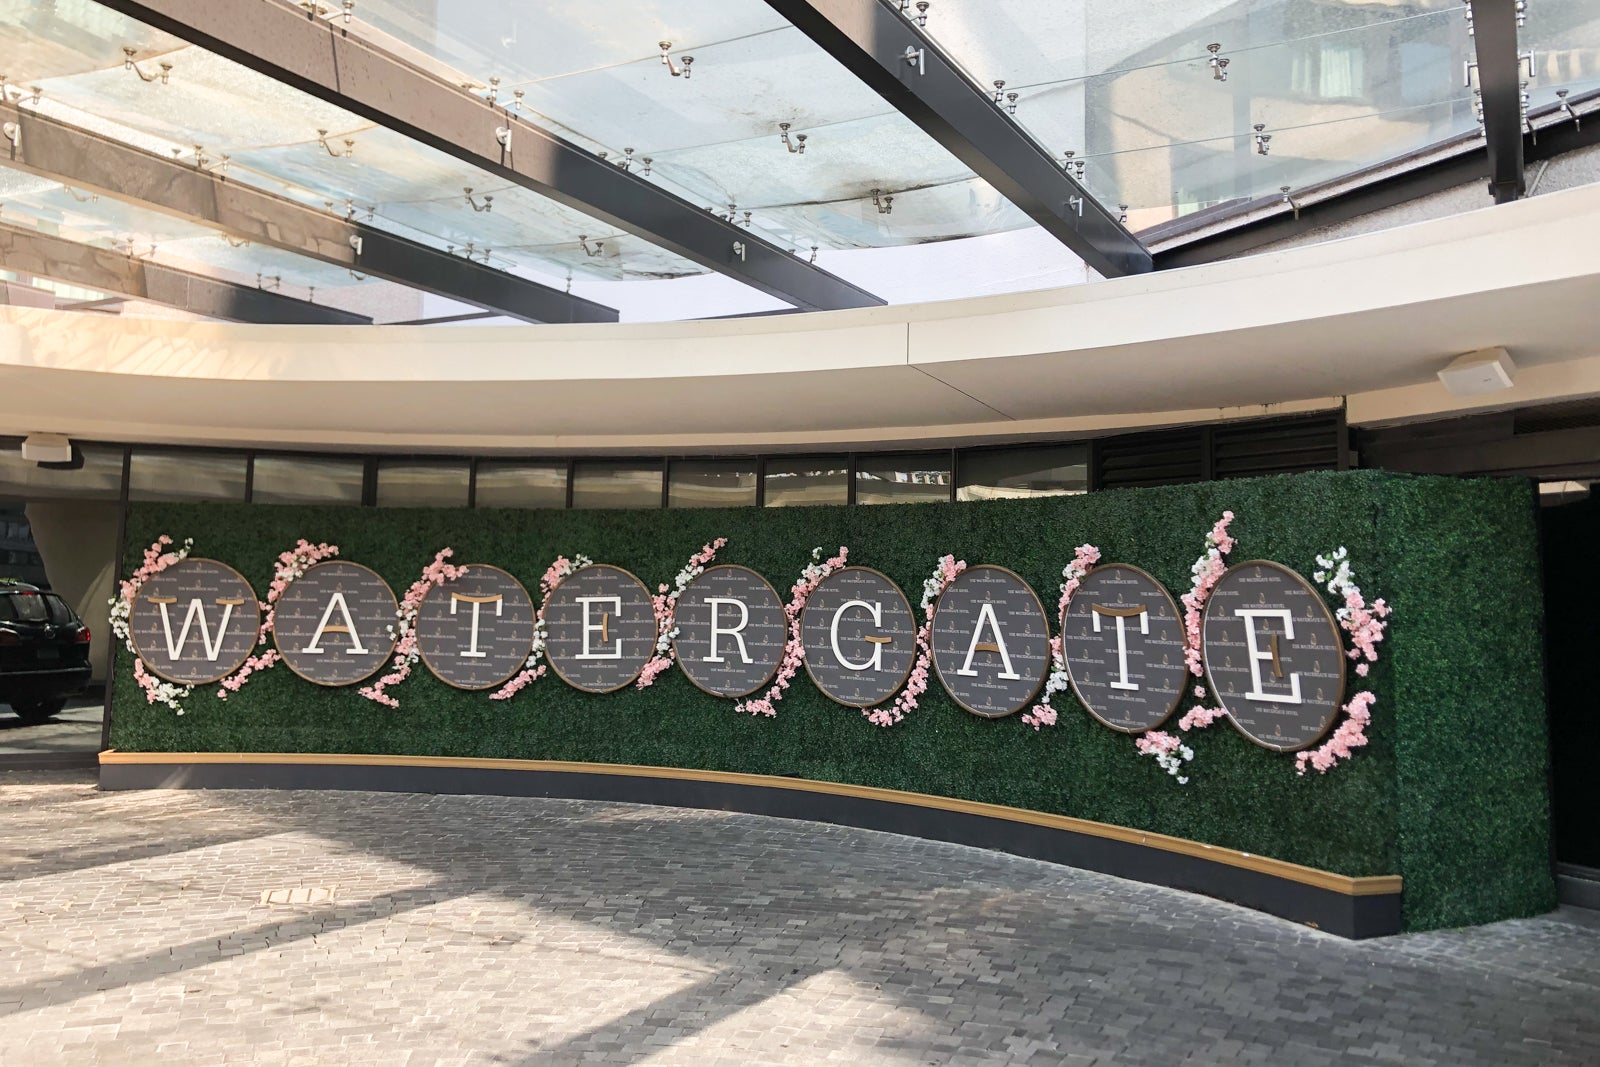 A break from the drab concrete exterior of the Watergate buildings, the faux grass hotel sign with pink floral accents provides a taste of the midcentury modern decor you'll find inside The Watergate Hotel.